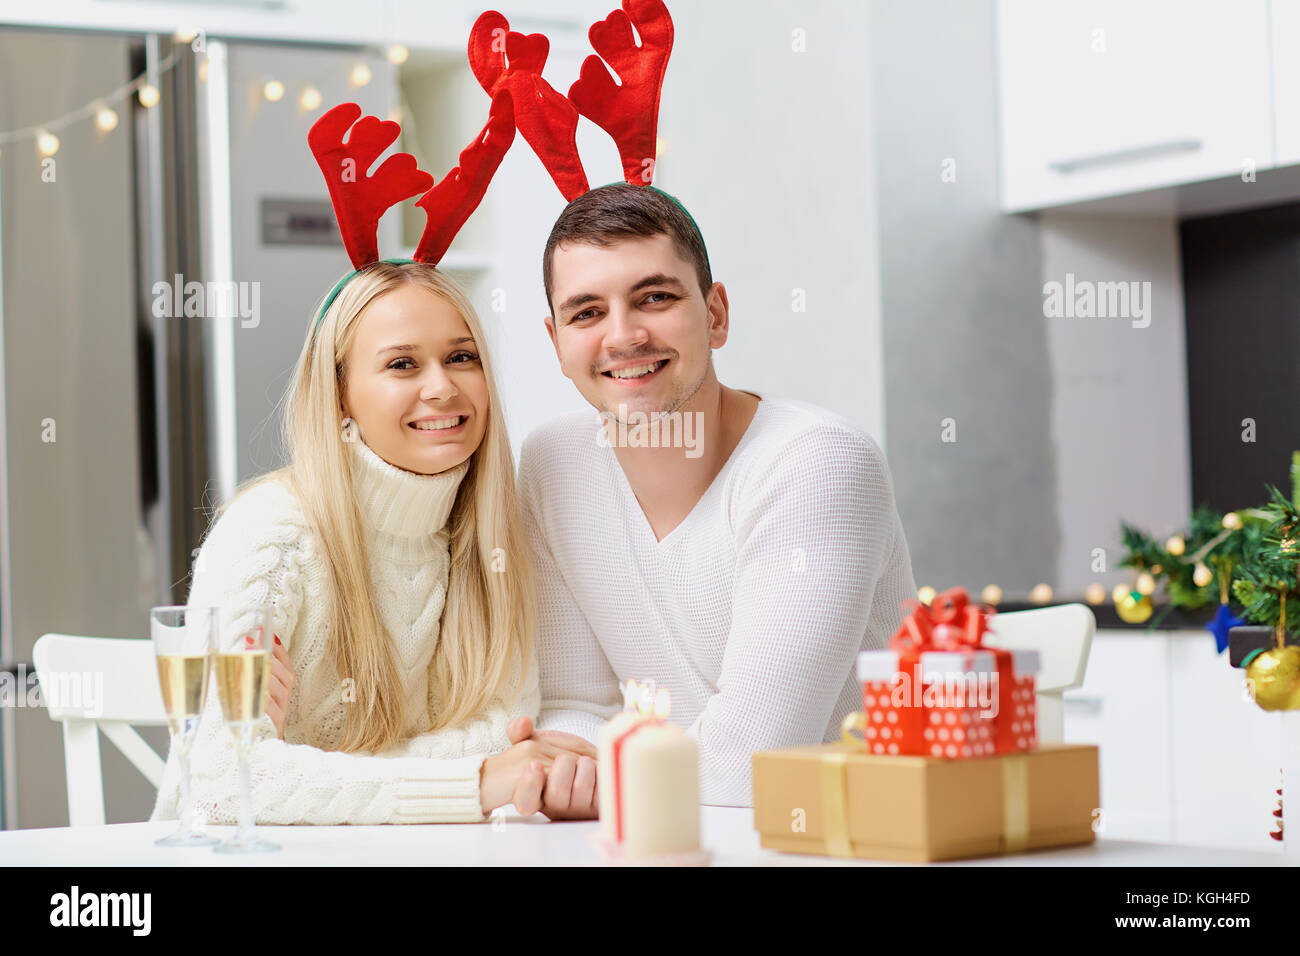 Couple in reindeer horns gives a Christmas present. Stock Photo